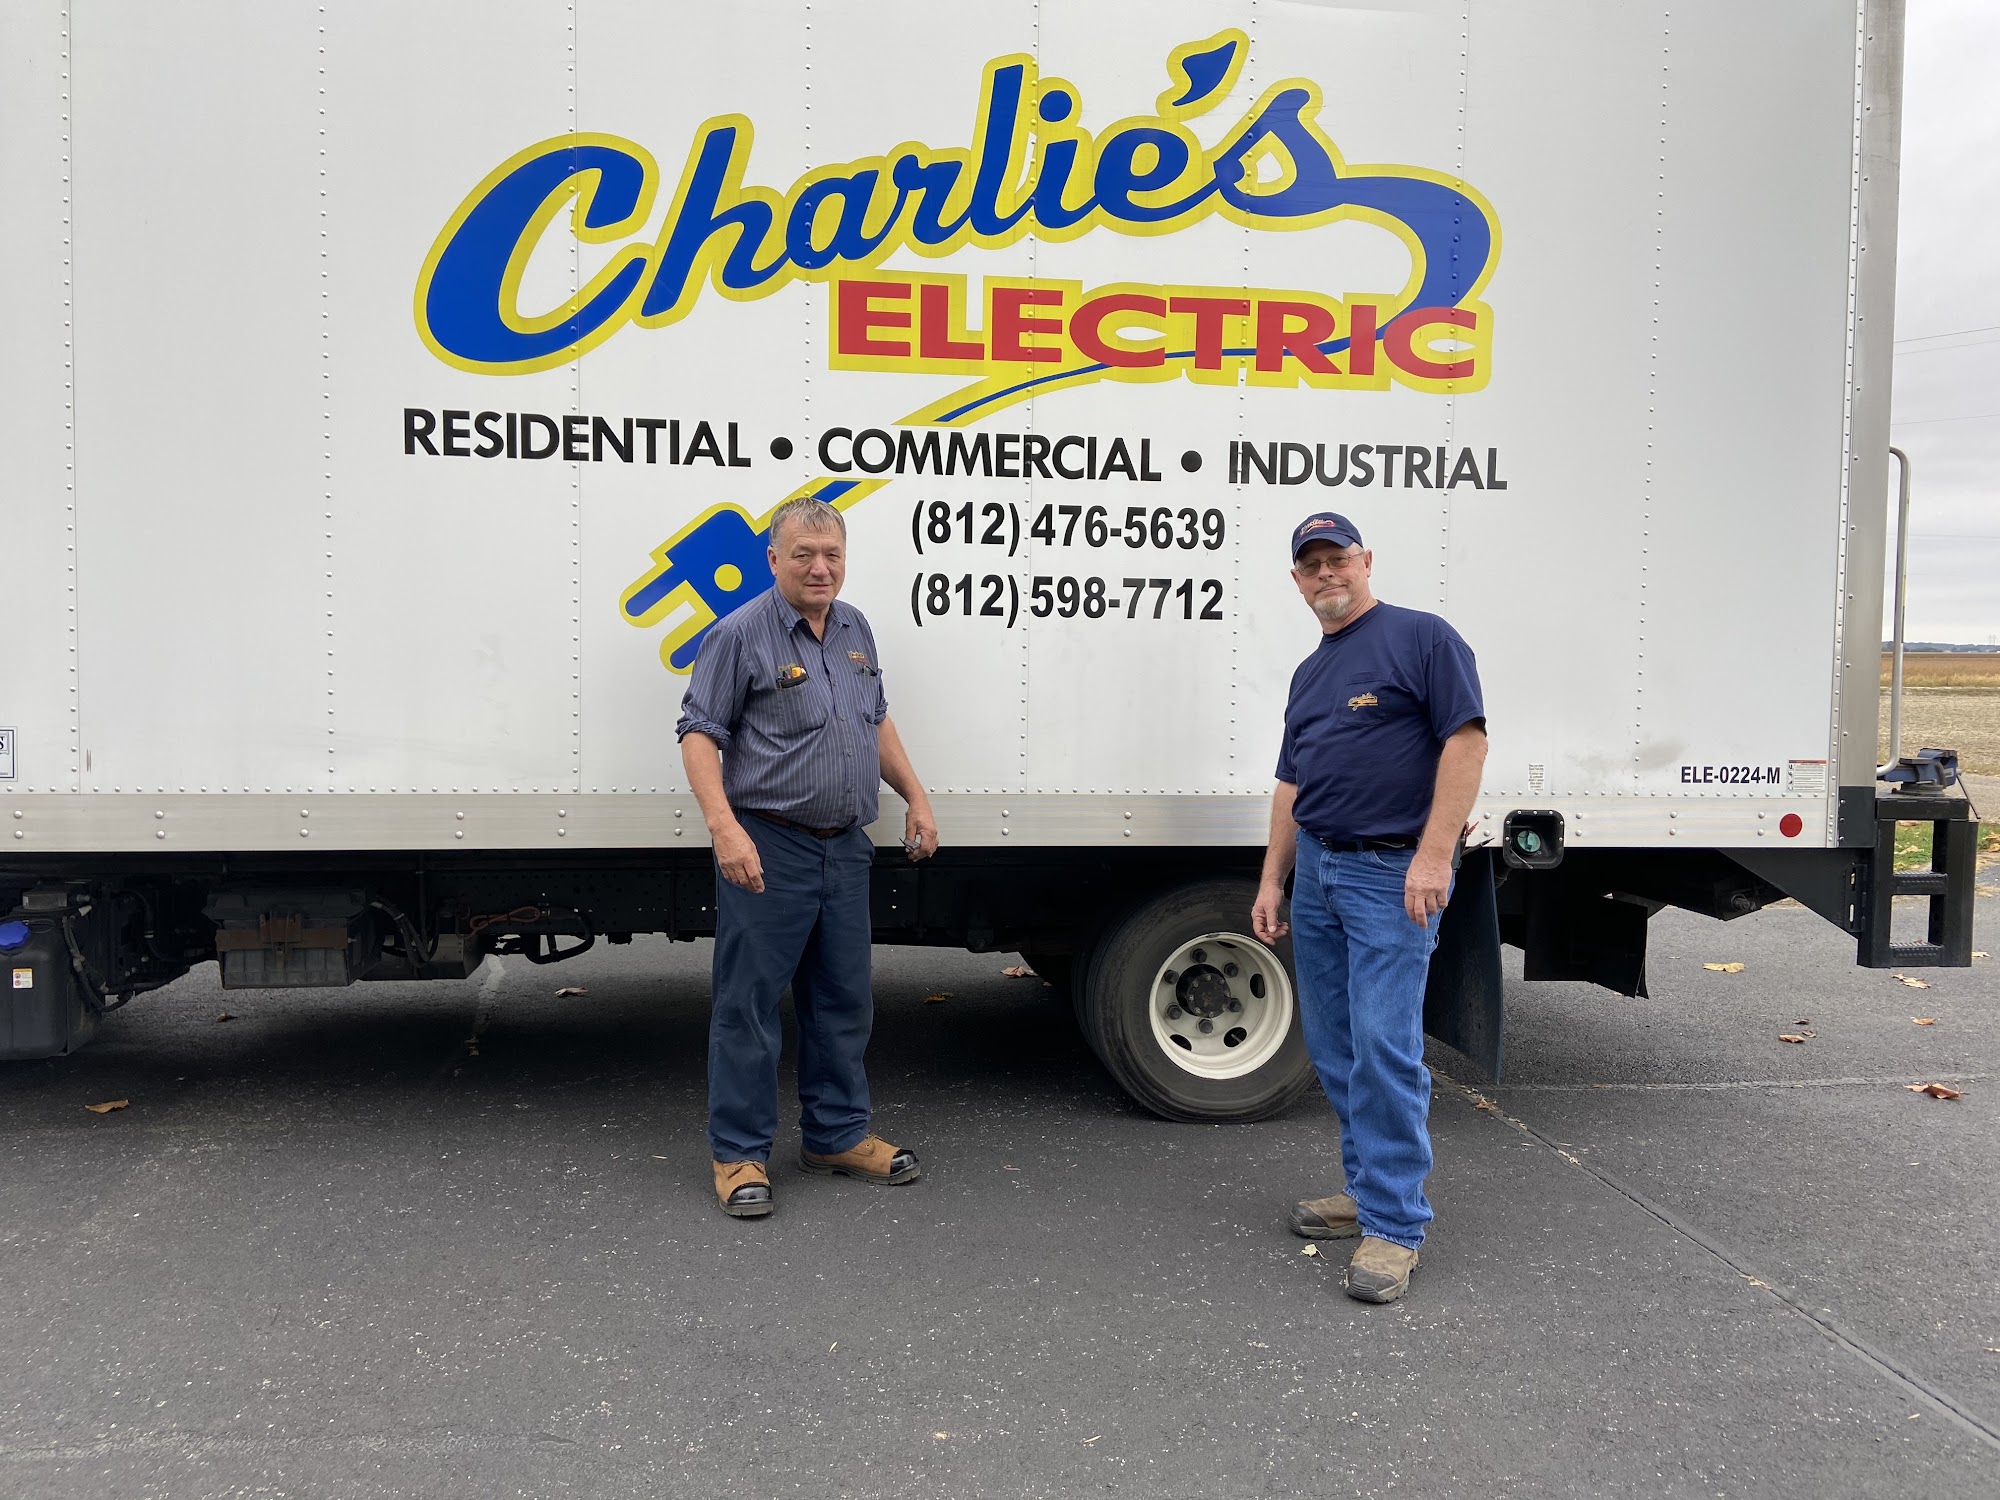 Charlie's Electric